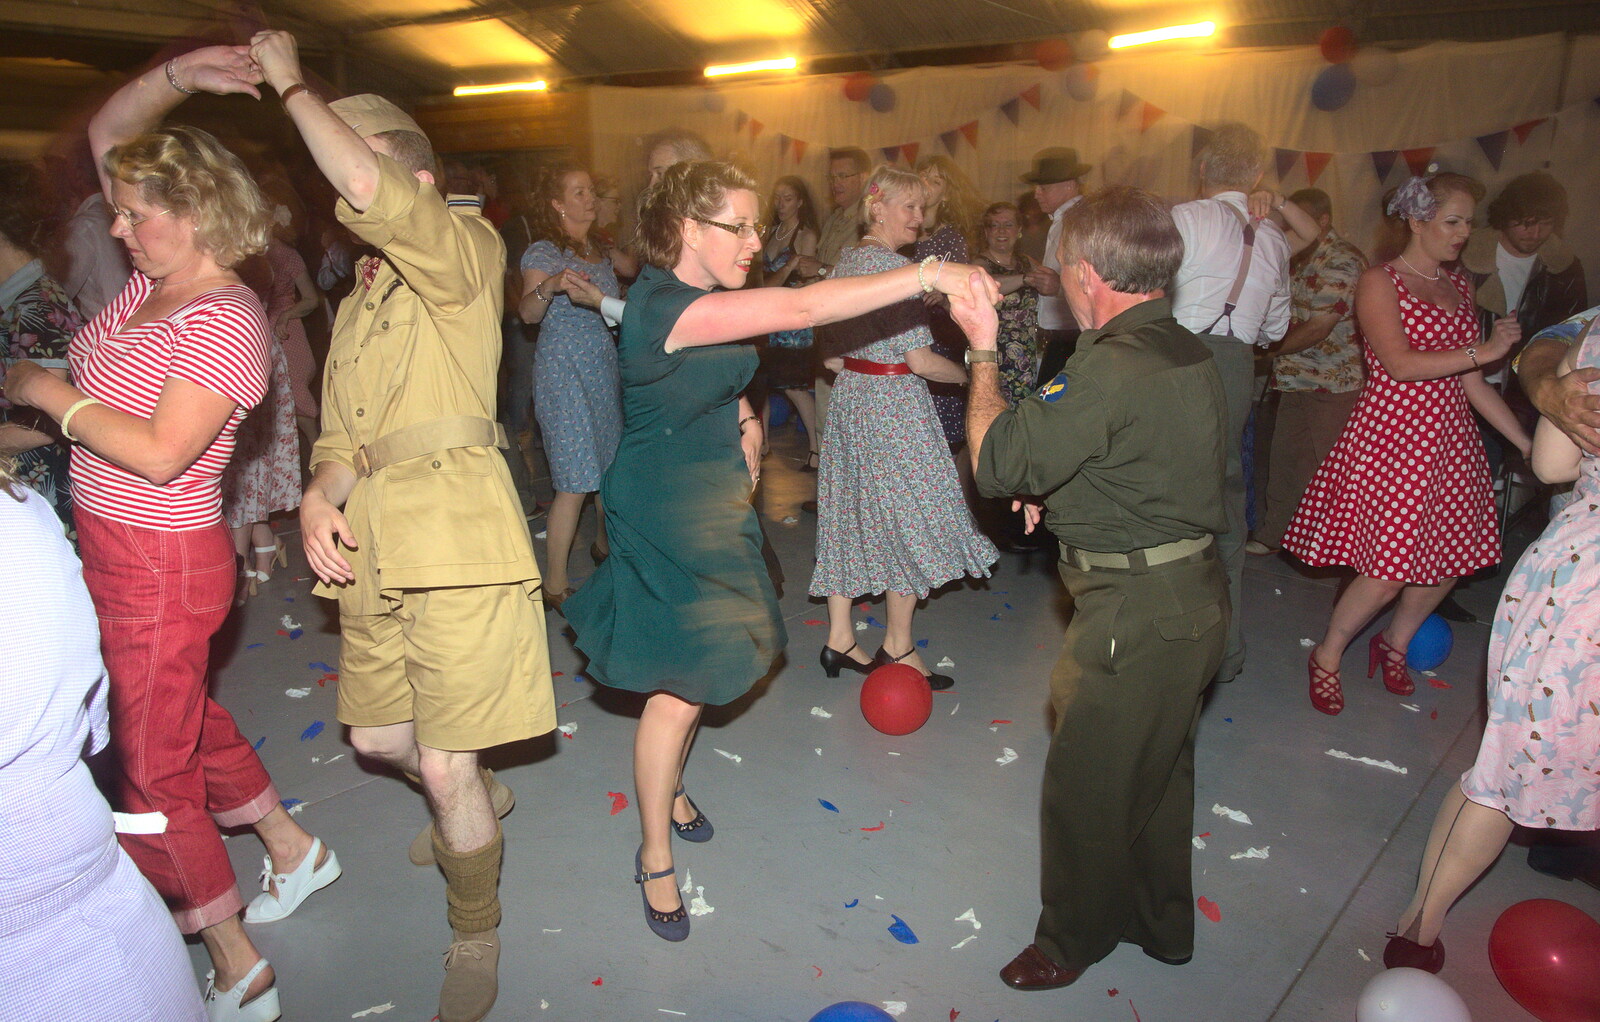 Some more swing dancing from "Our Little Friends" Warbirds Hangar Dance, Hardwick, Norfolk - 9th July 2016